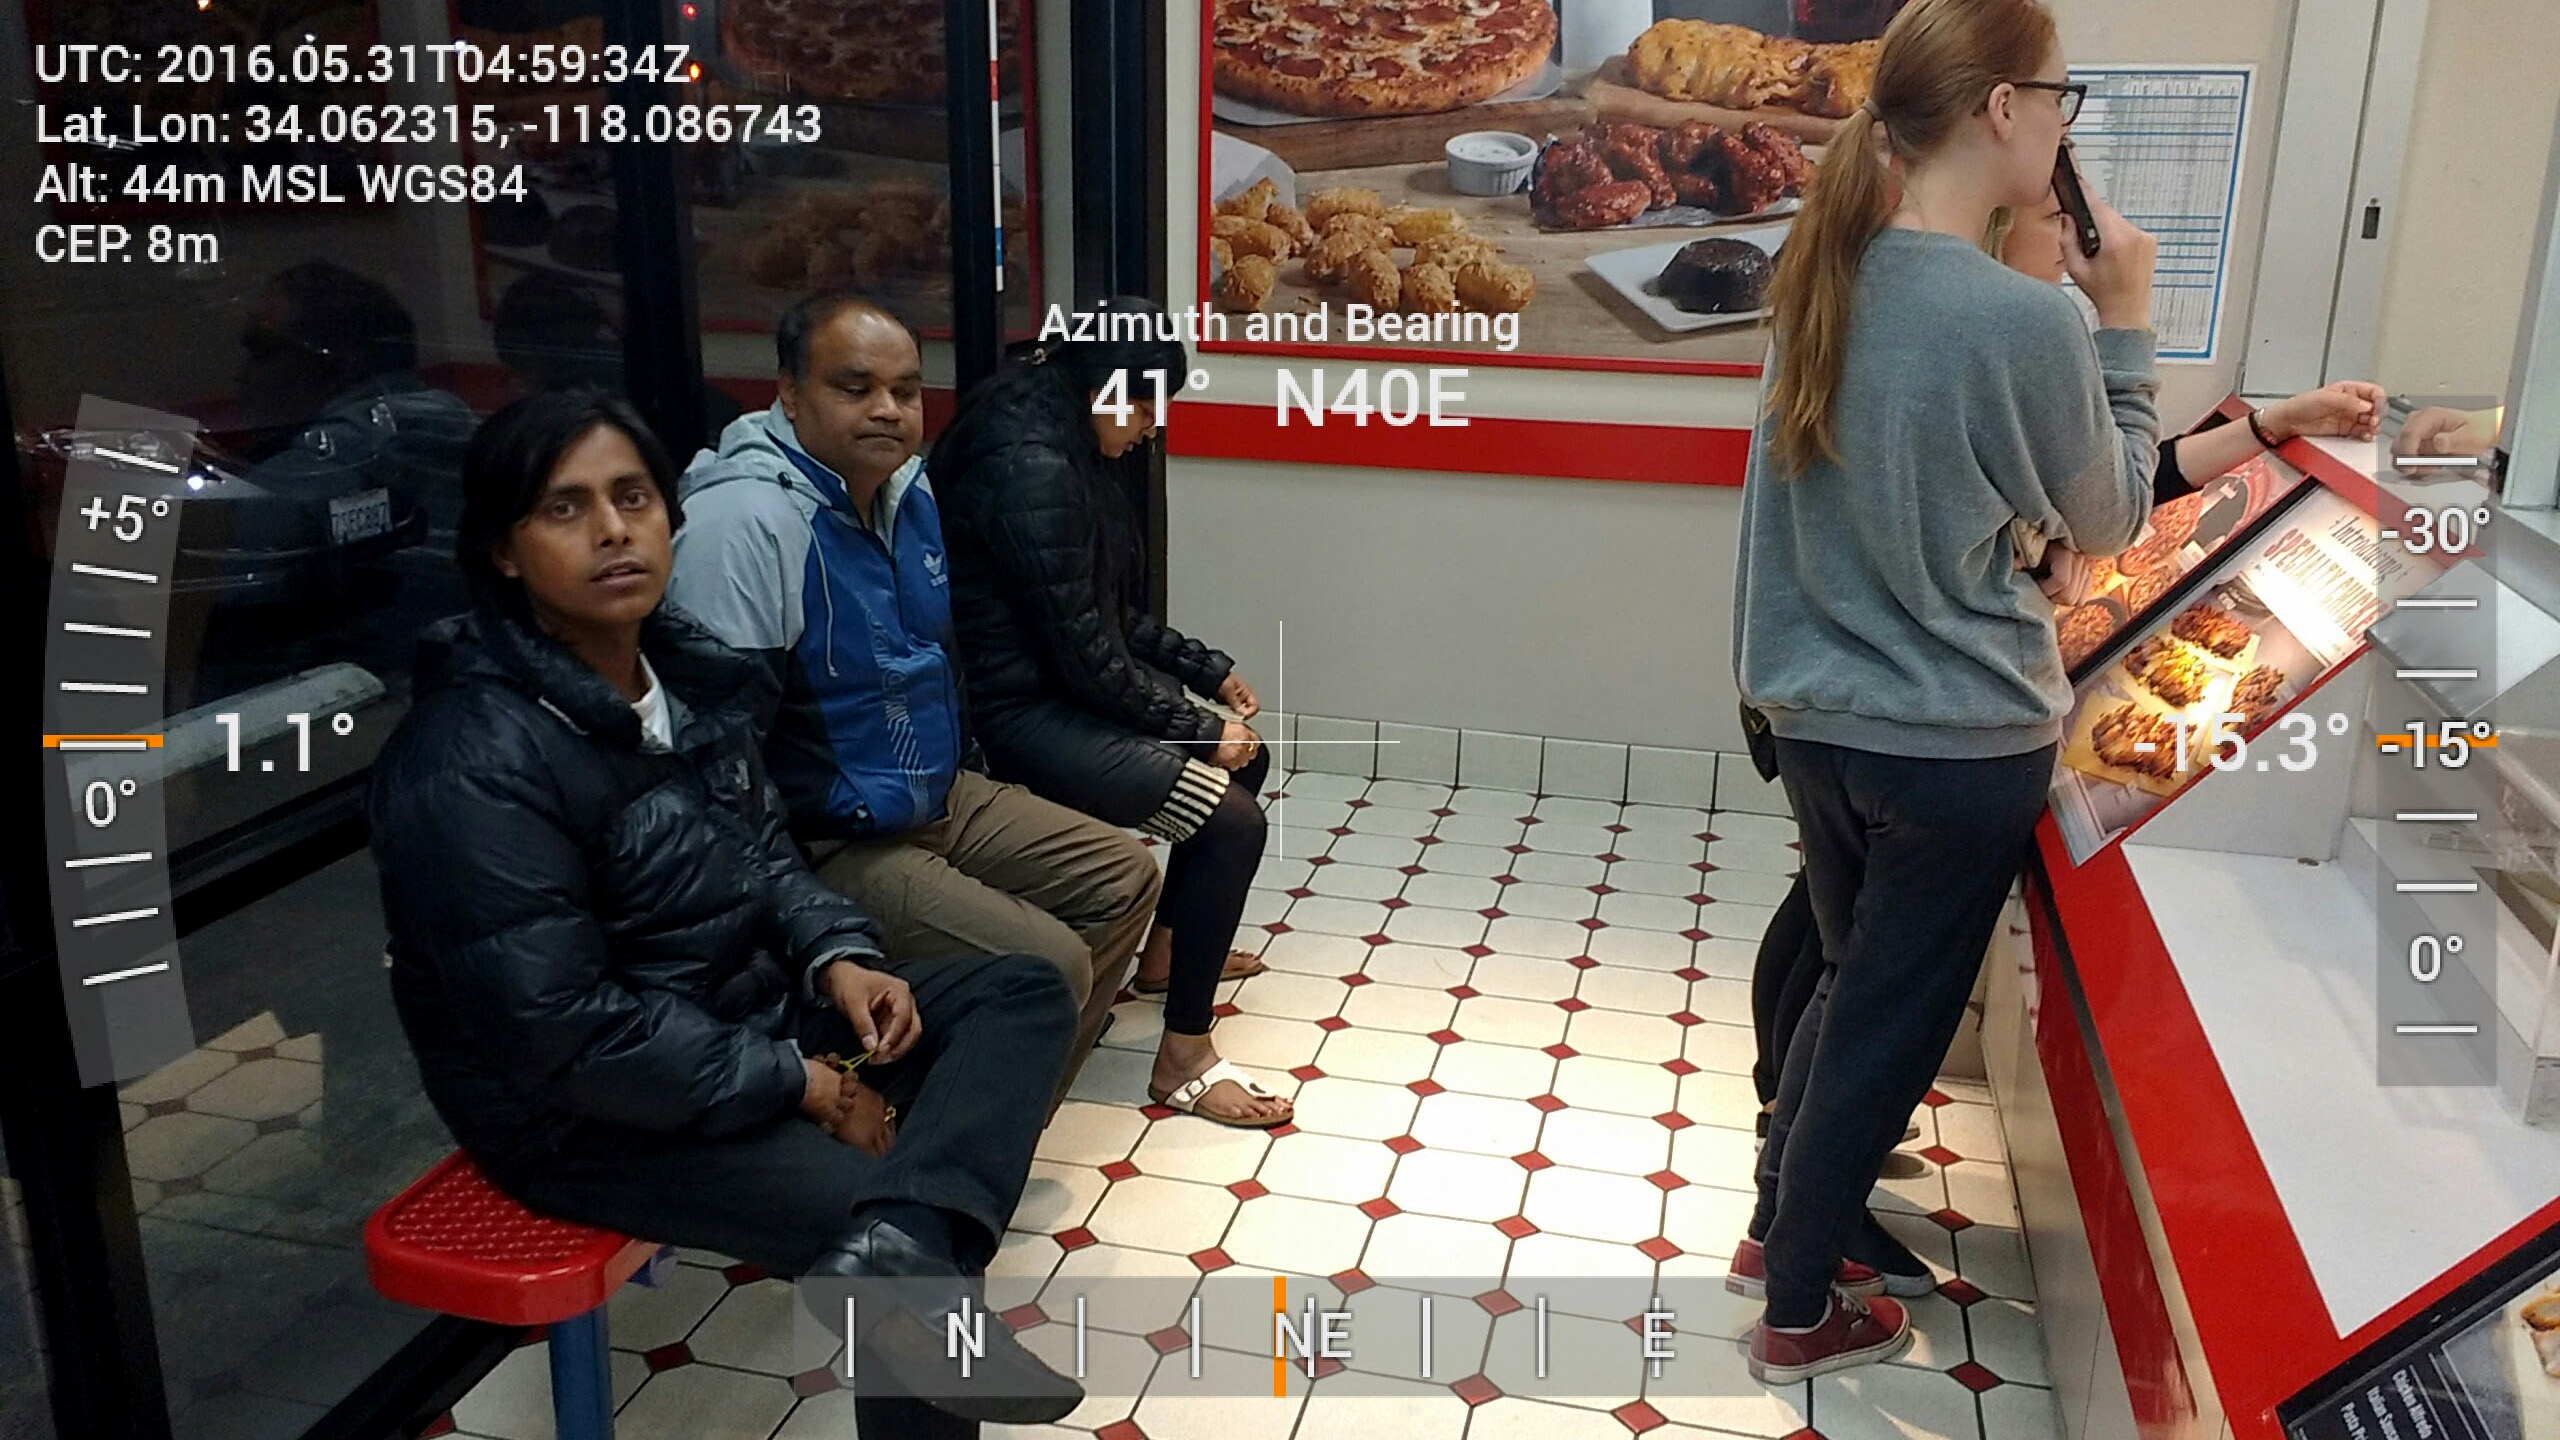 Dioptra GPS / XYZ Compass image of people ordering at a Dominoes Pizza window